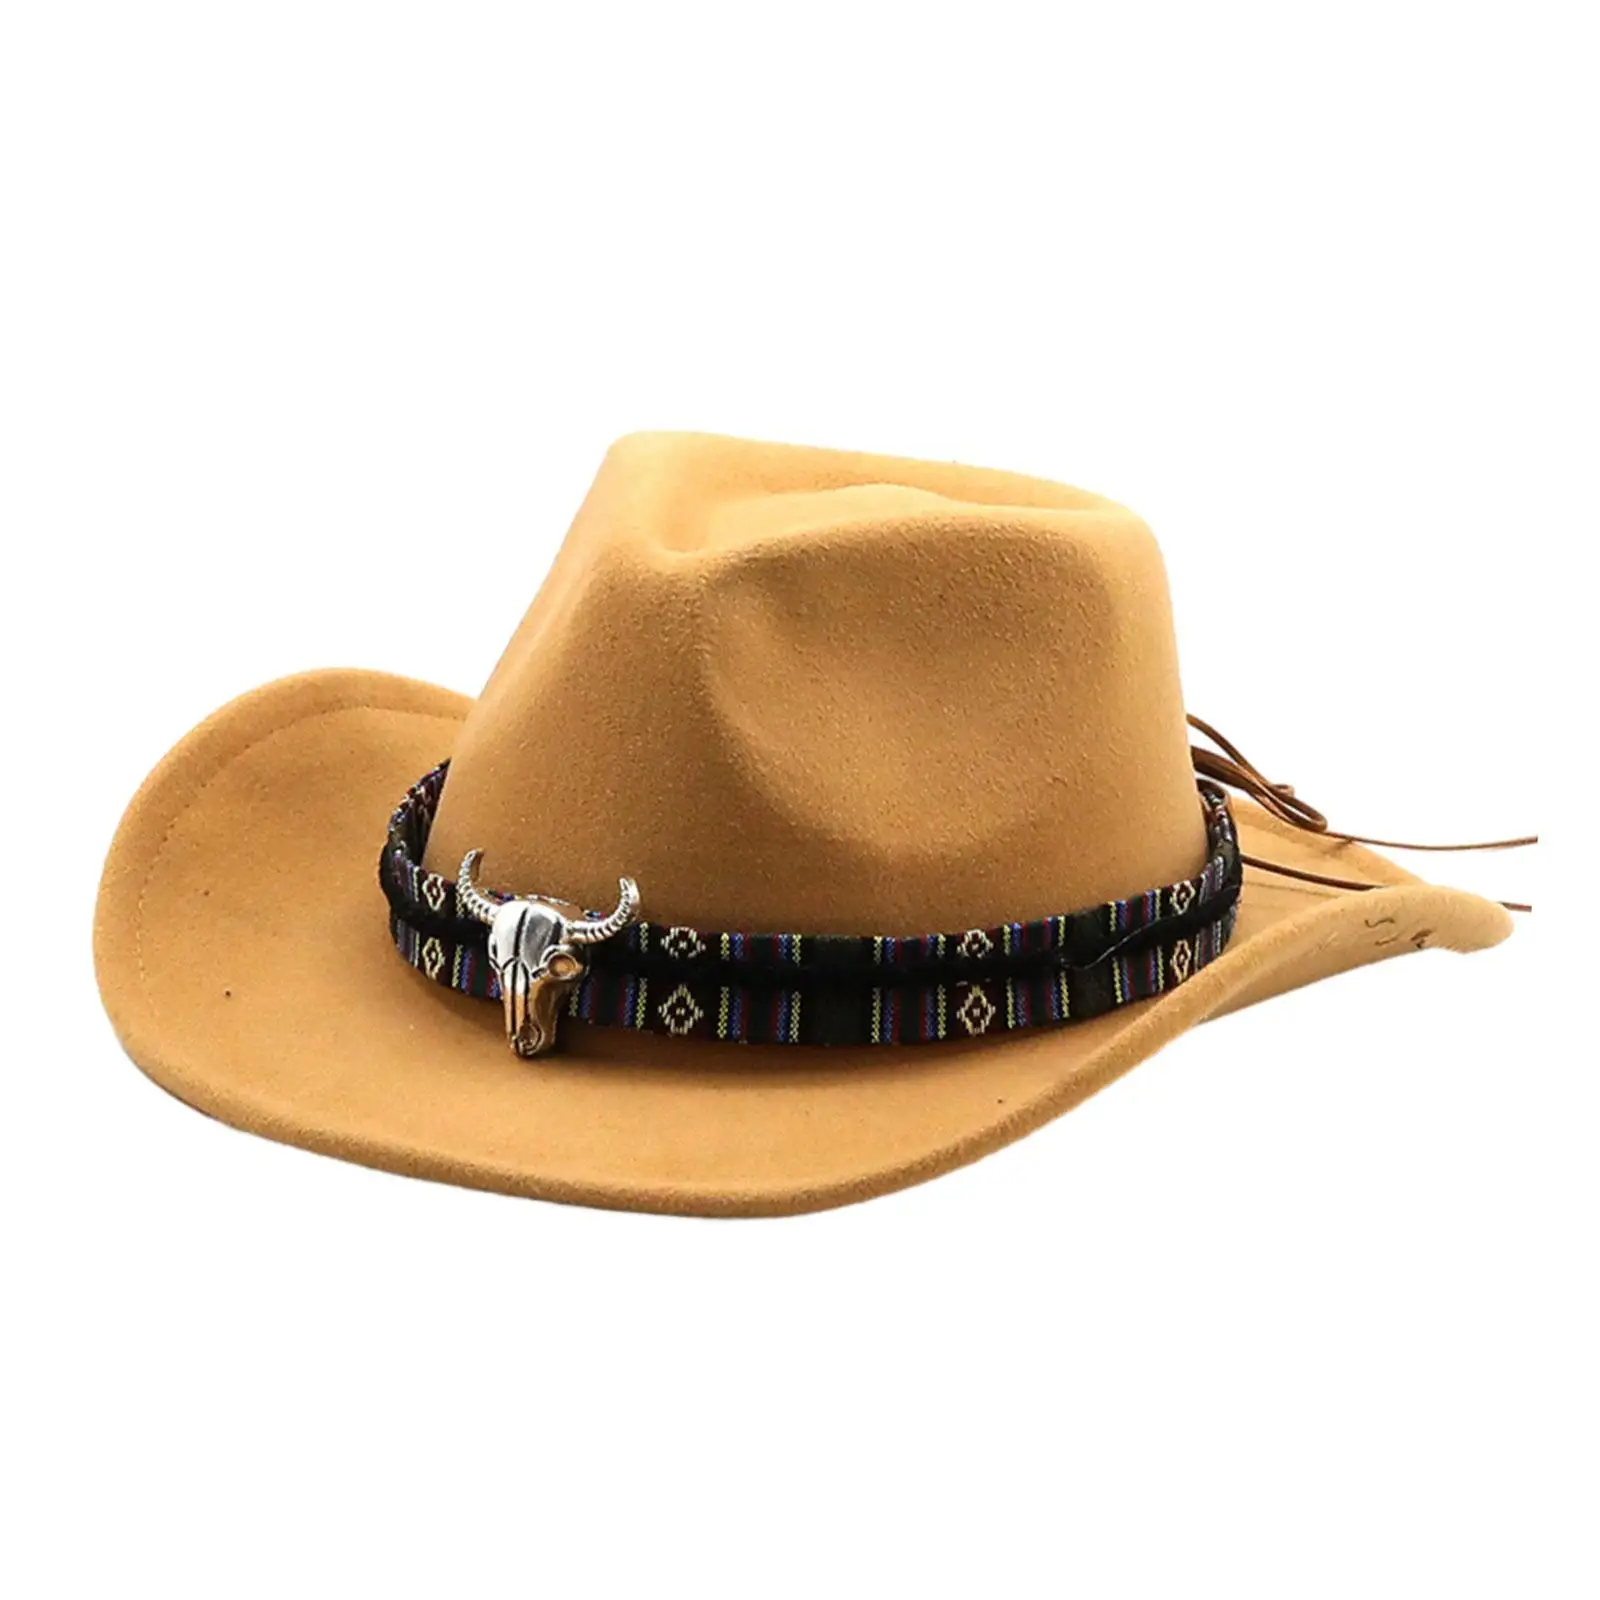 Cowboy Hat Comfortable Summer Outdoor Sunshade Hat for Fishing Travel Hiking